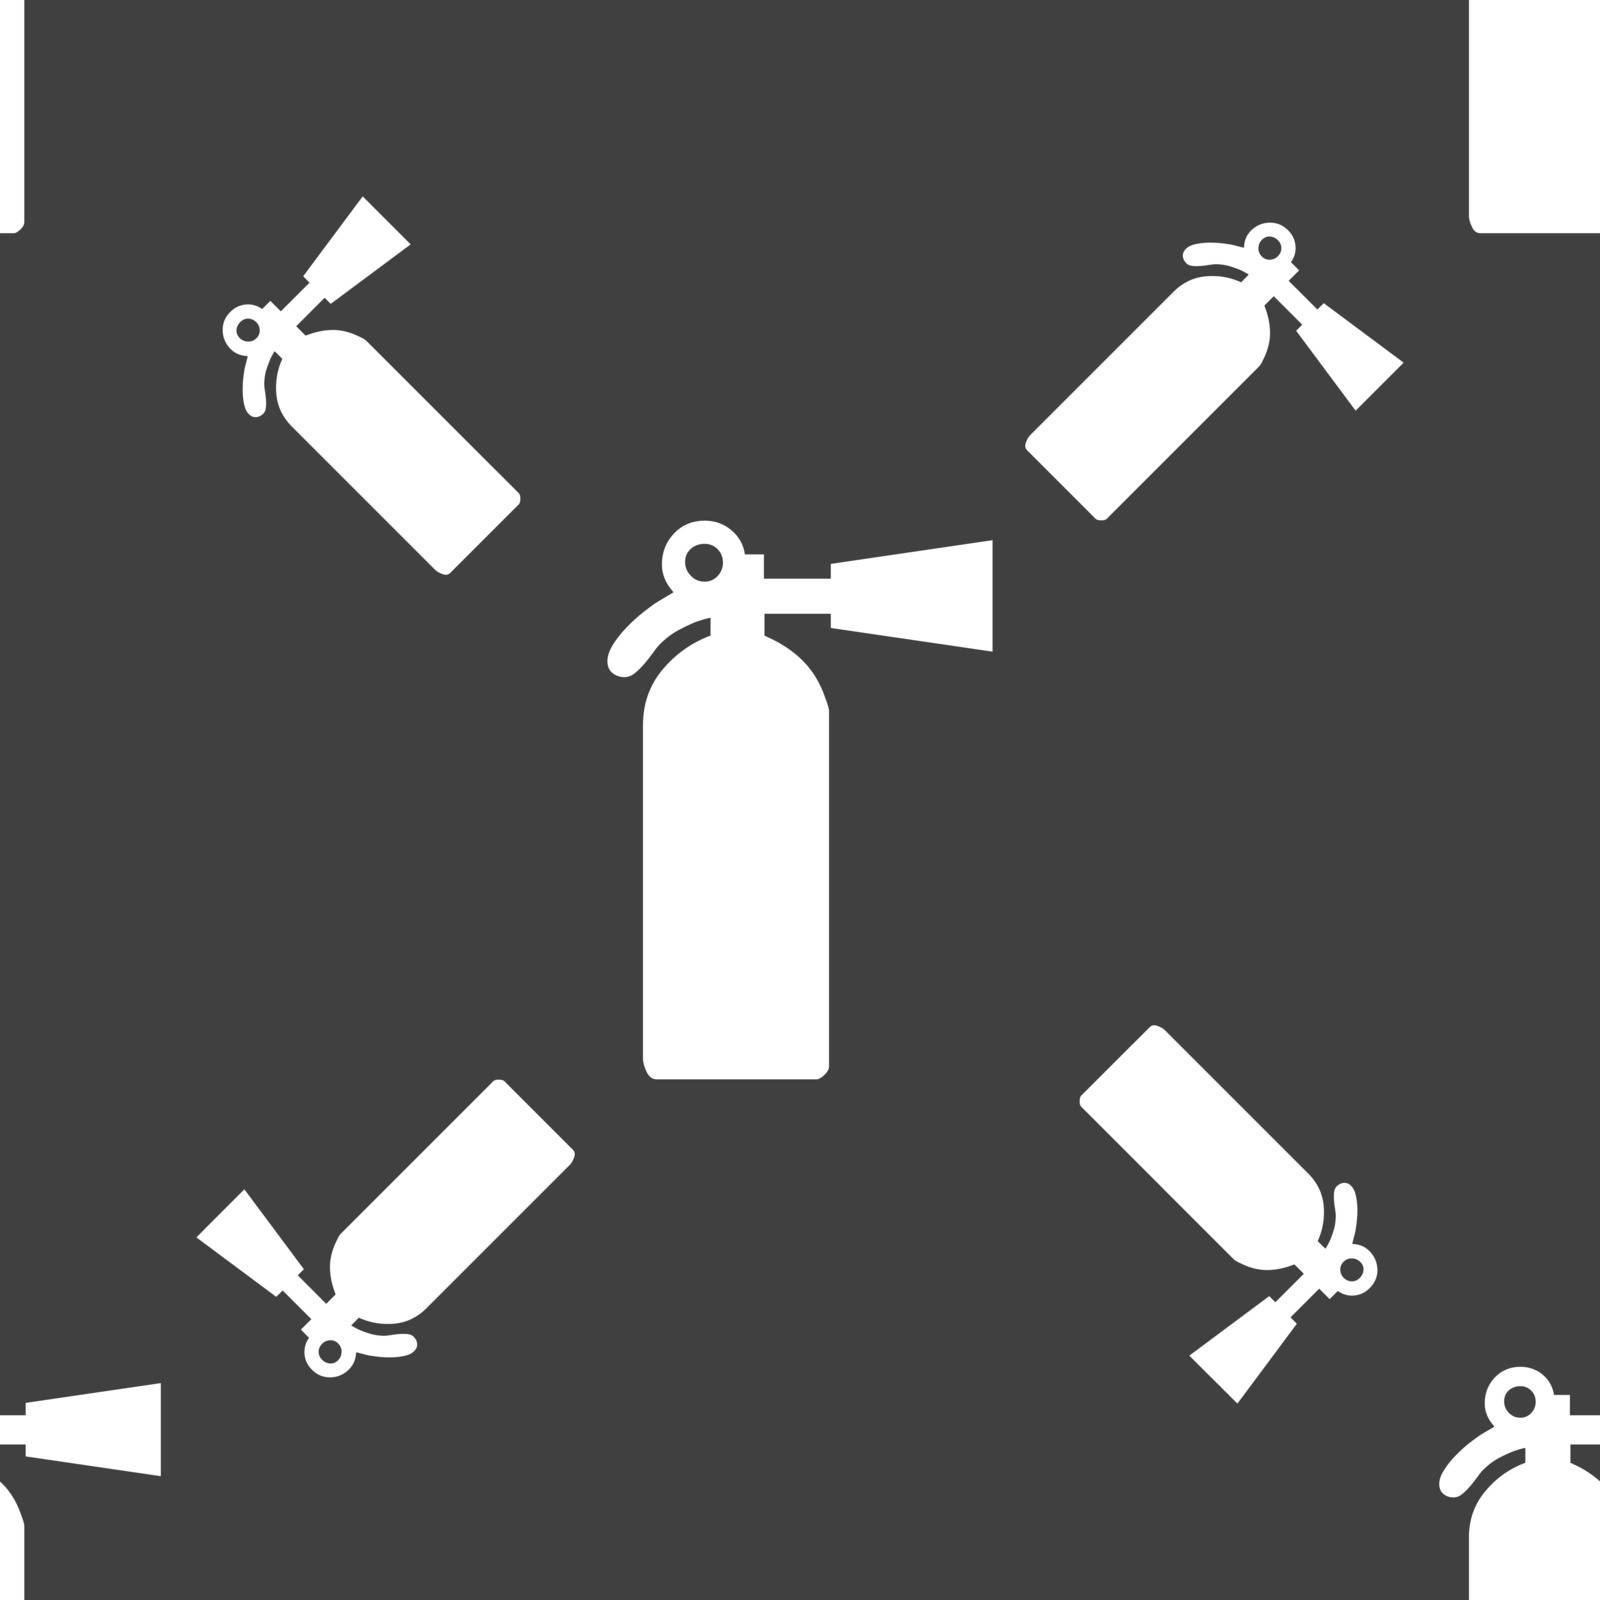 extinguisher icon sign. Seamless pattern on a gray background. Vector illustration